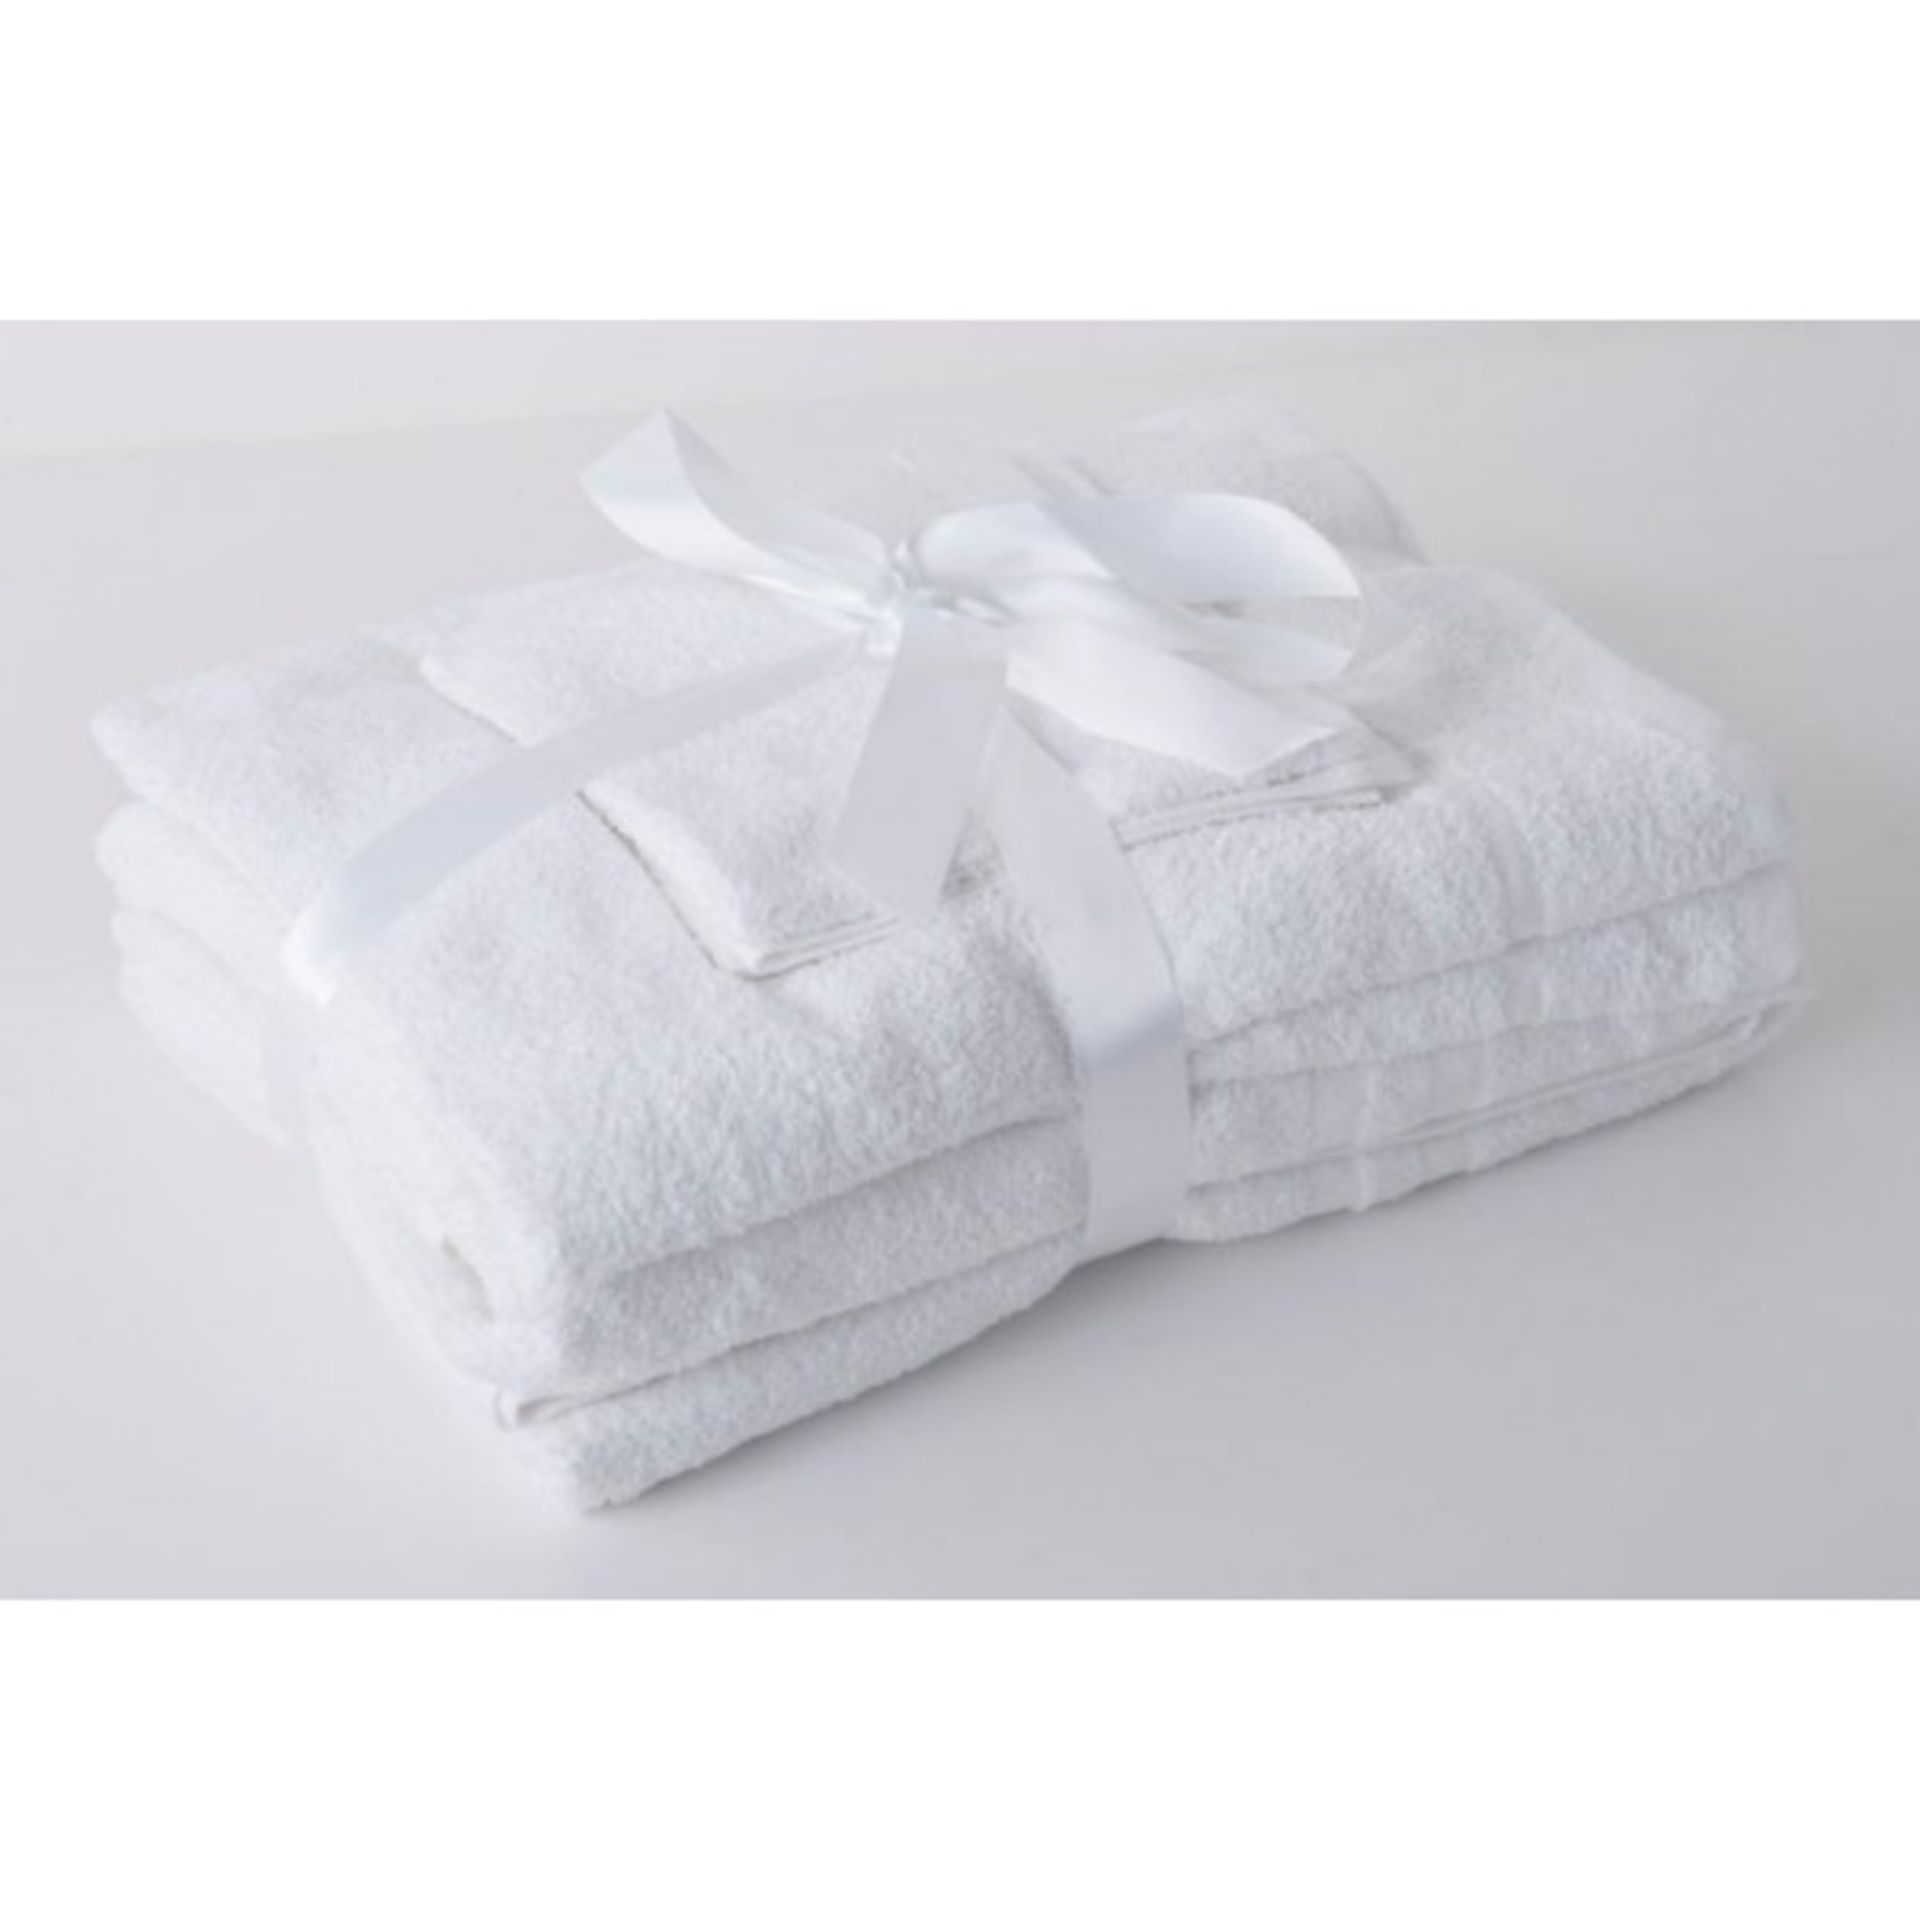 V Brand New Six Piece White Towel Bale Set Including Two Bath Towels-Two Hand Towels & Two Face